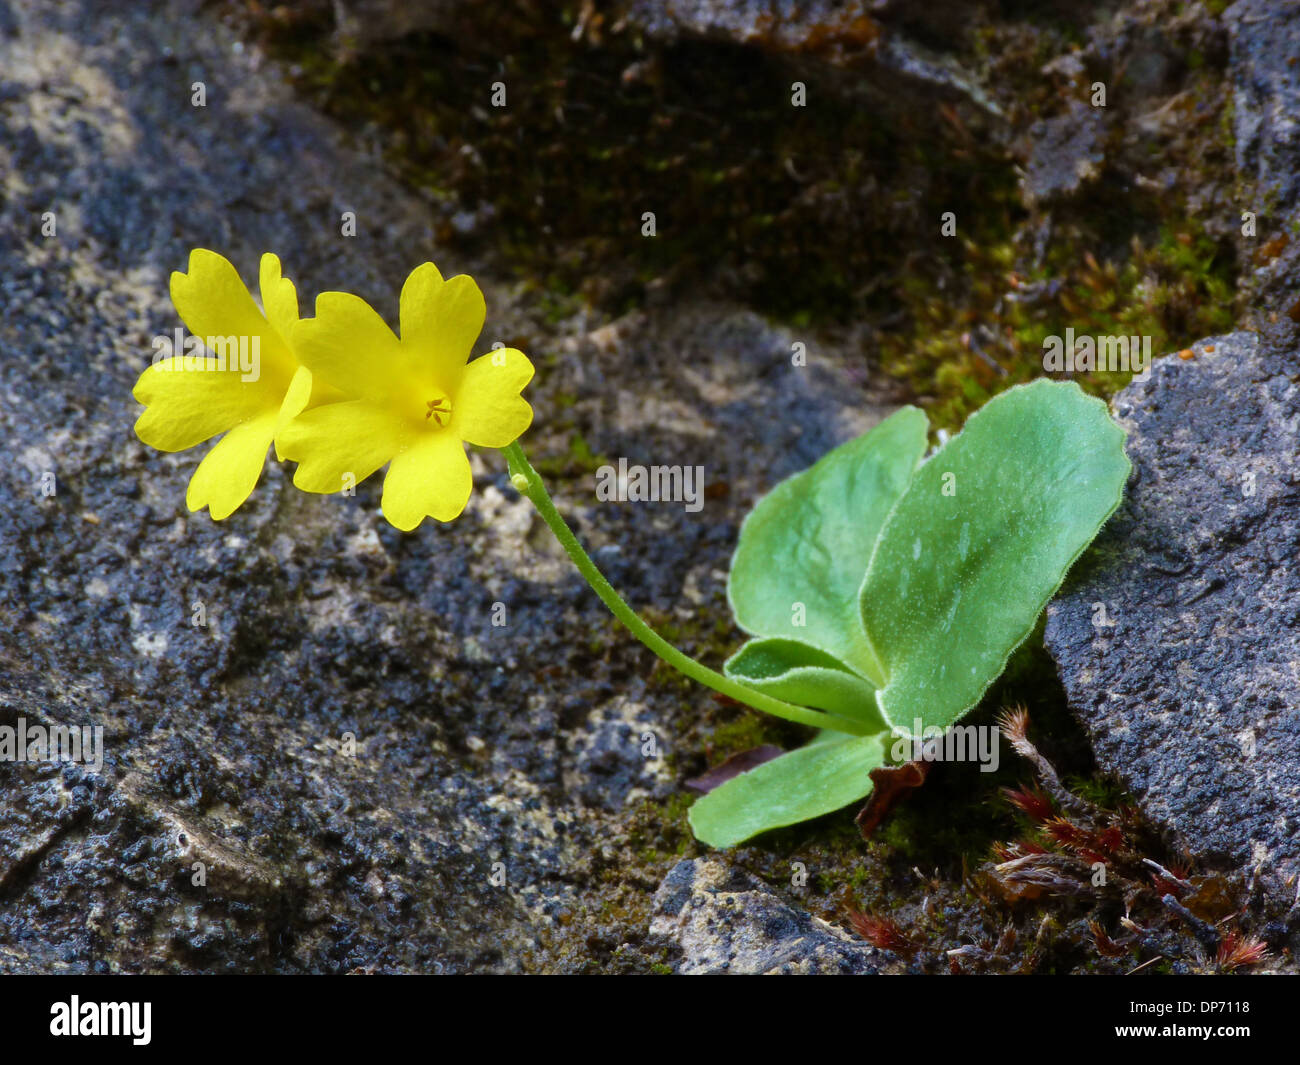 Auricula (Primula auricula) flowering, growing in crevise of limestone, Dolomites, Italian Alps, Italy, June Stock Photo